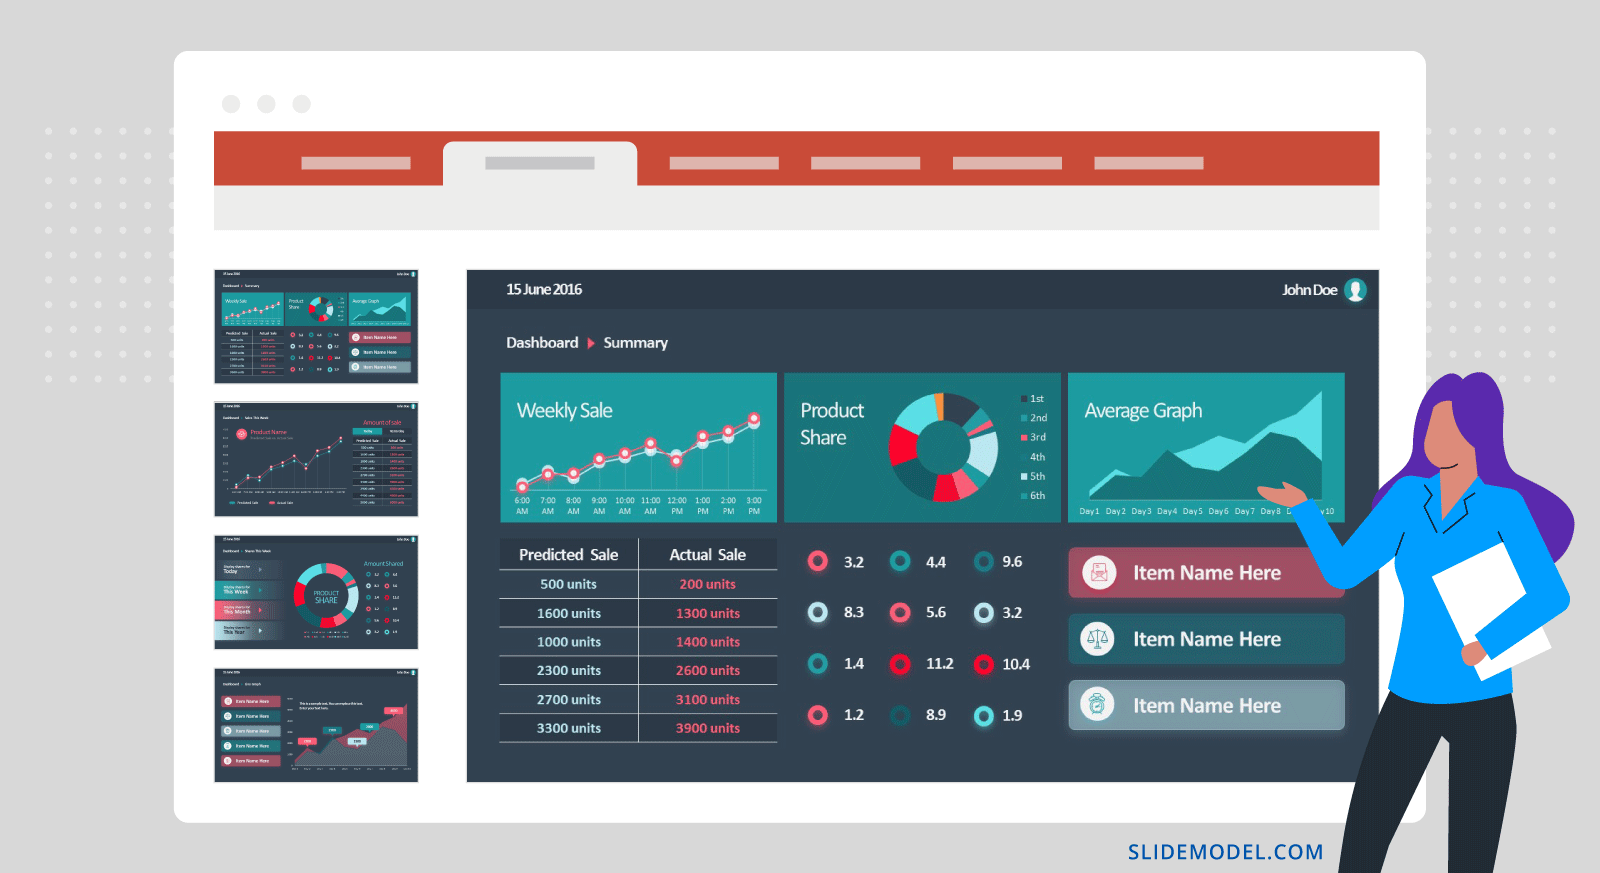 Example of a Sales Dashboard Presentation showing important KPI metrics.